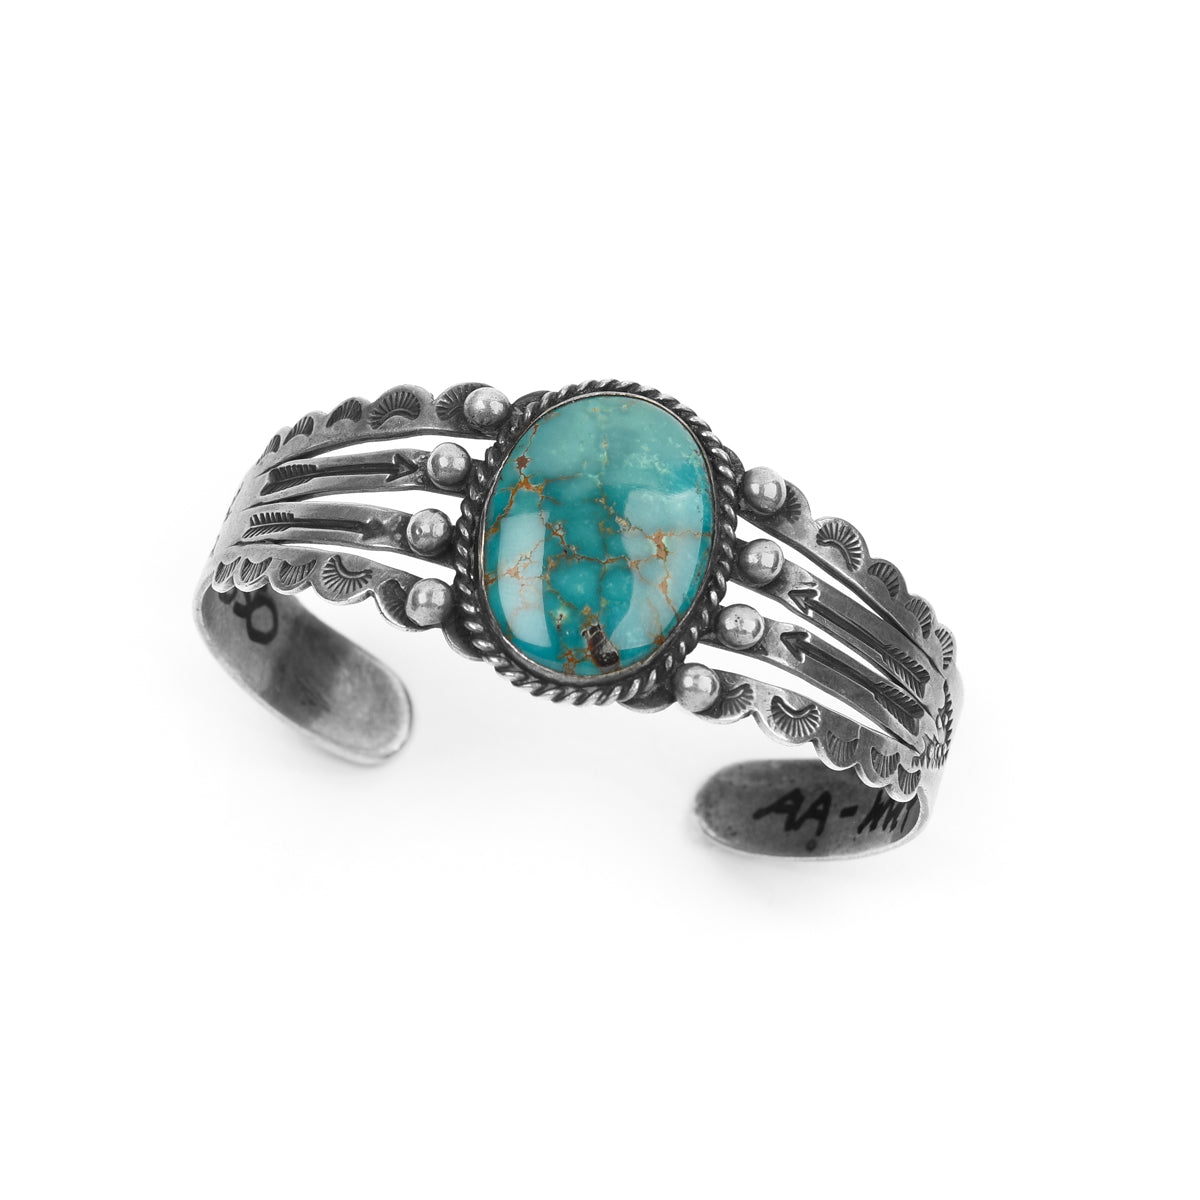 Vintage Turquoise Cuff